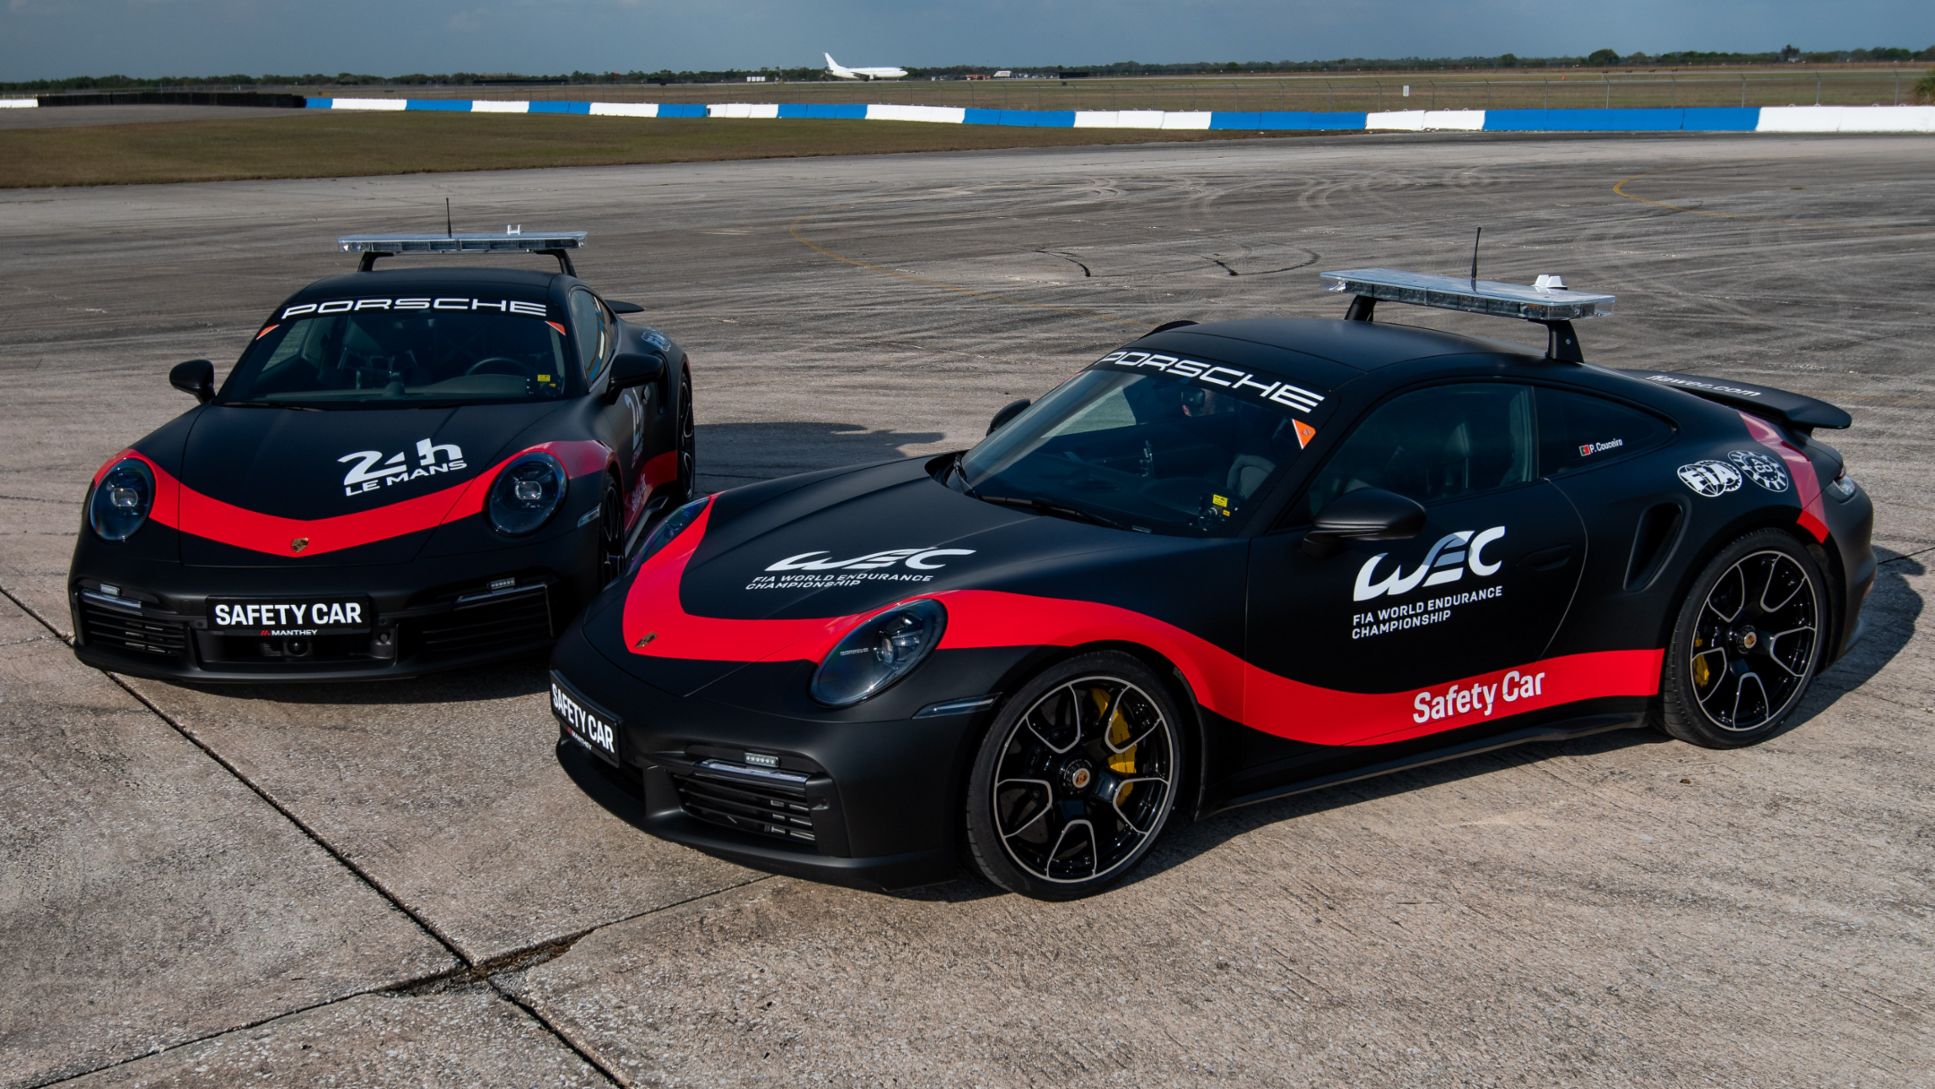 911 Turbo S: New Porsche Safety-Car for the FIA World Endurance Championship inclusive the 24 hours of Le Mans